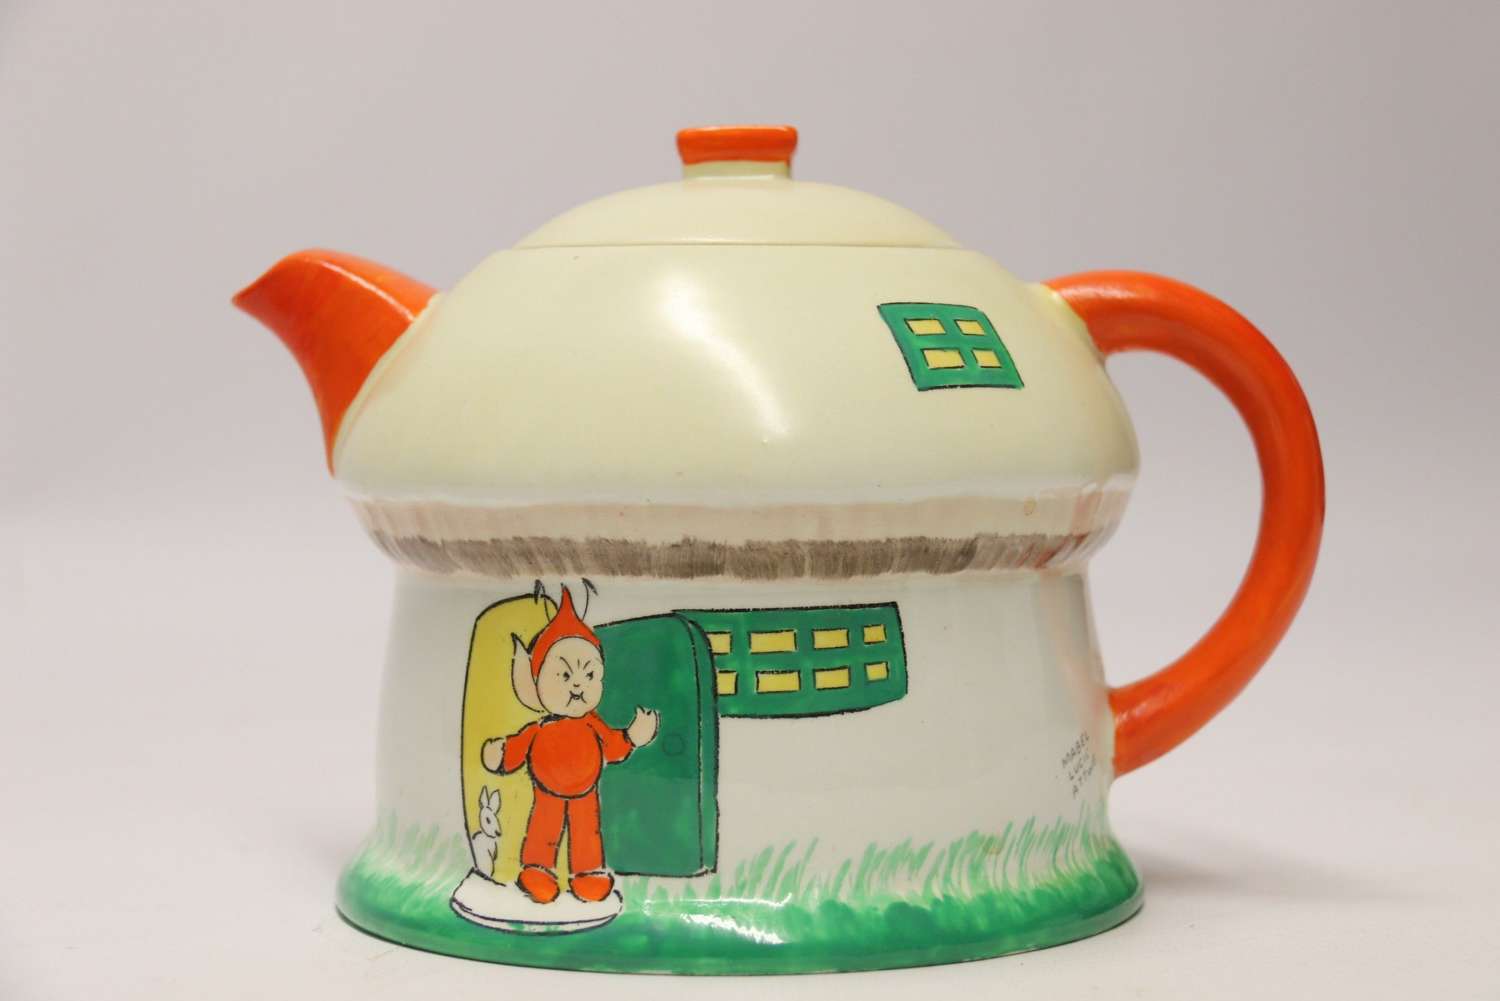 A Rare Shelly Porcelain Novelty  Tea Pot, Circa 1930  Designed By Mable Lucy Attwell